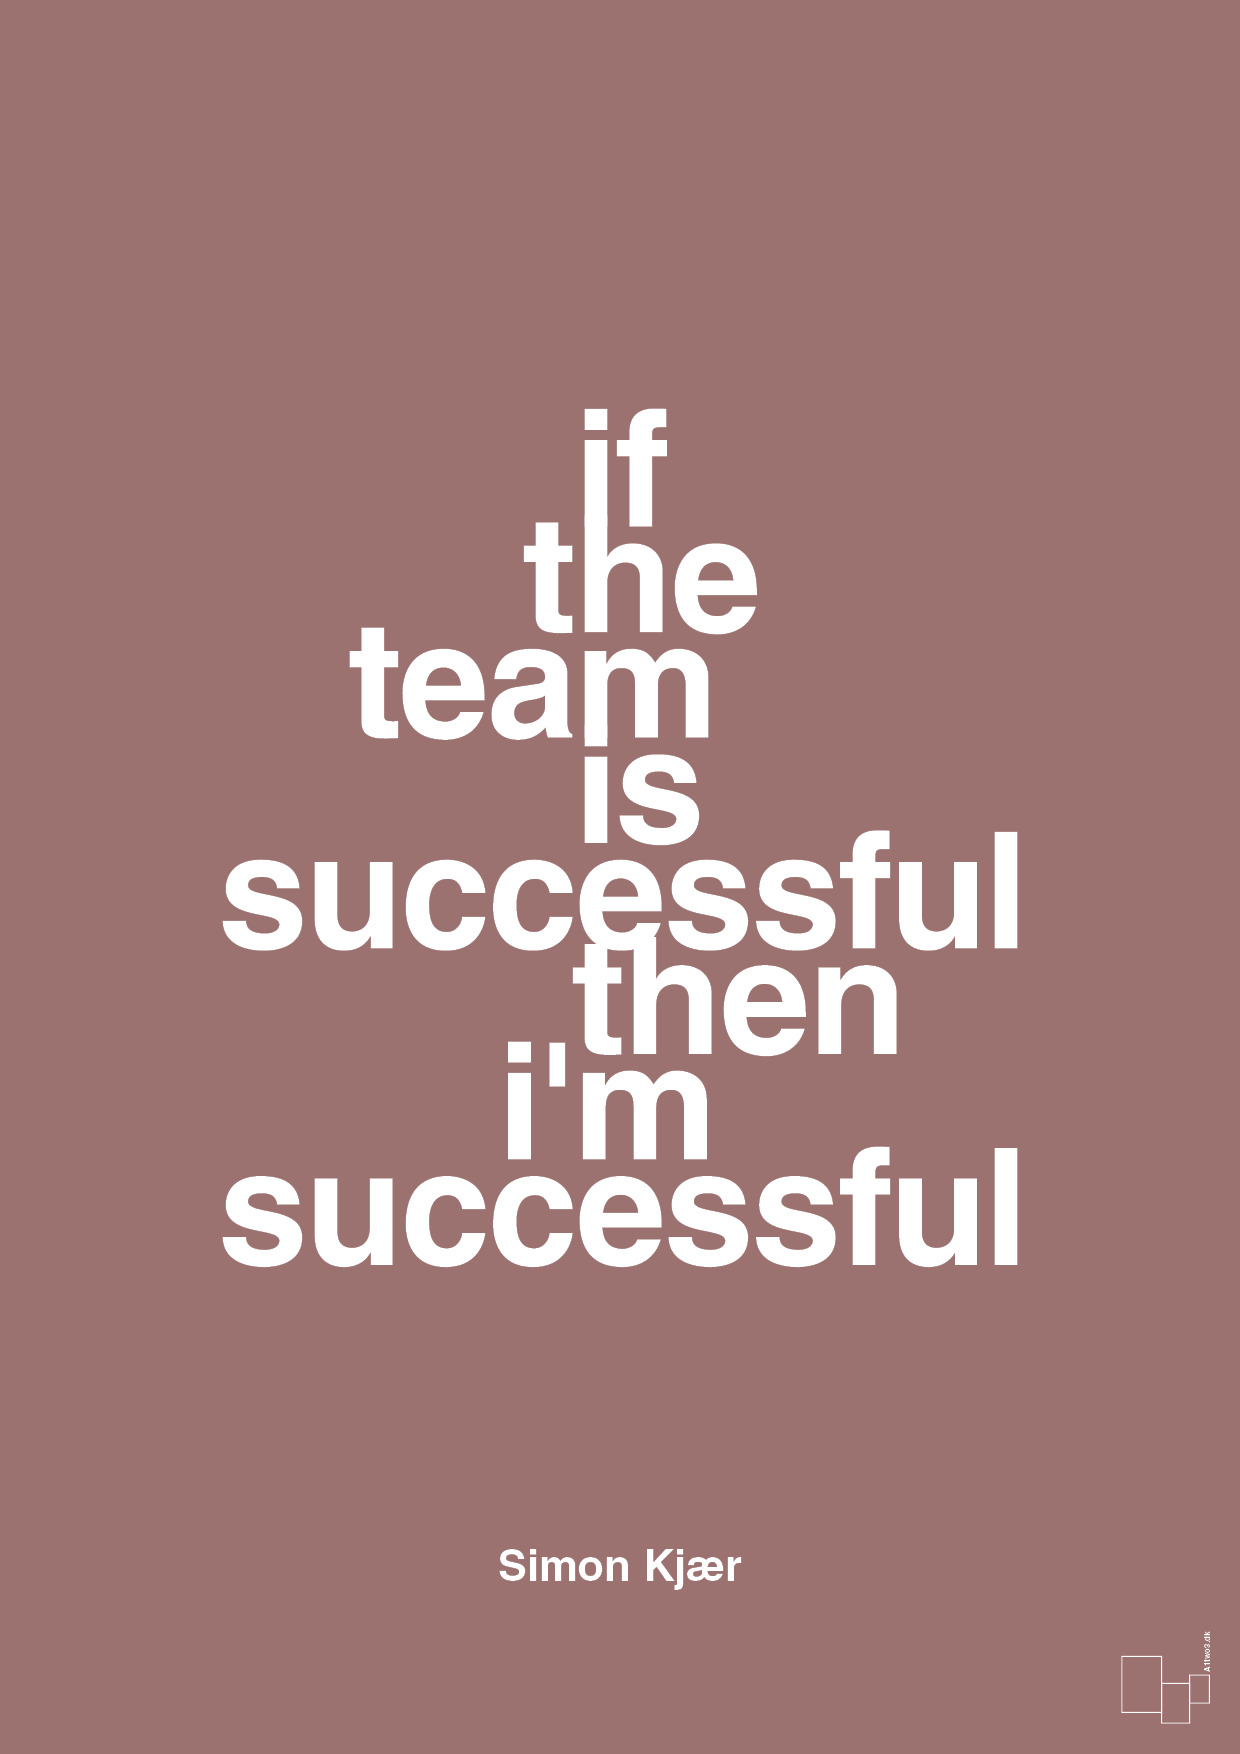 if the team is successful then i'm successful - Plakat med Citater i Plum